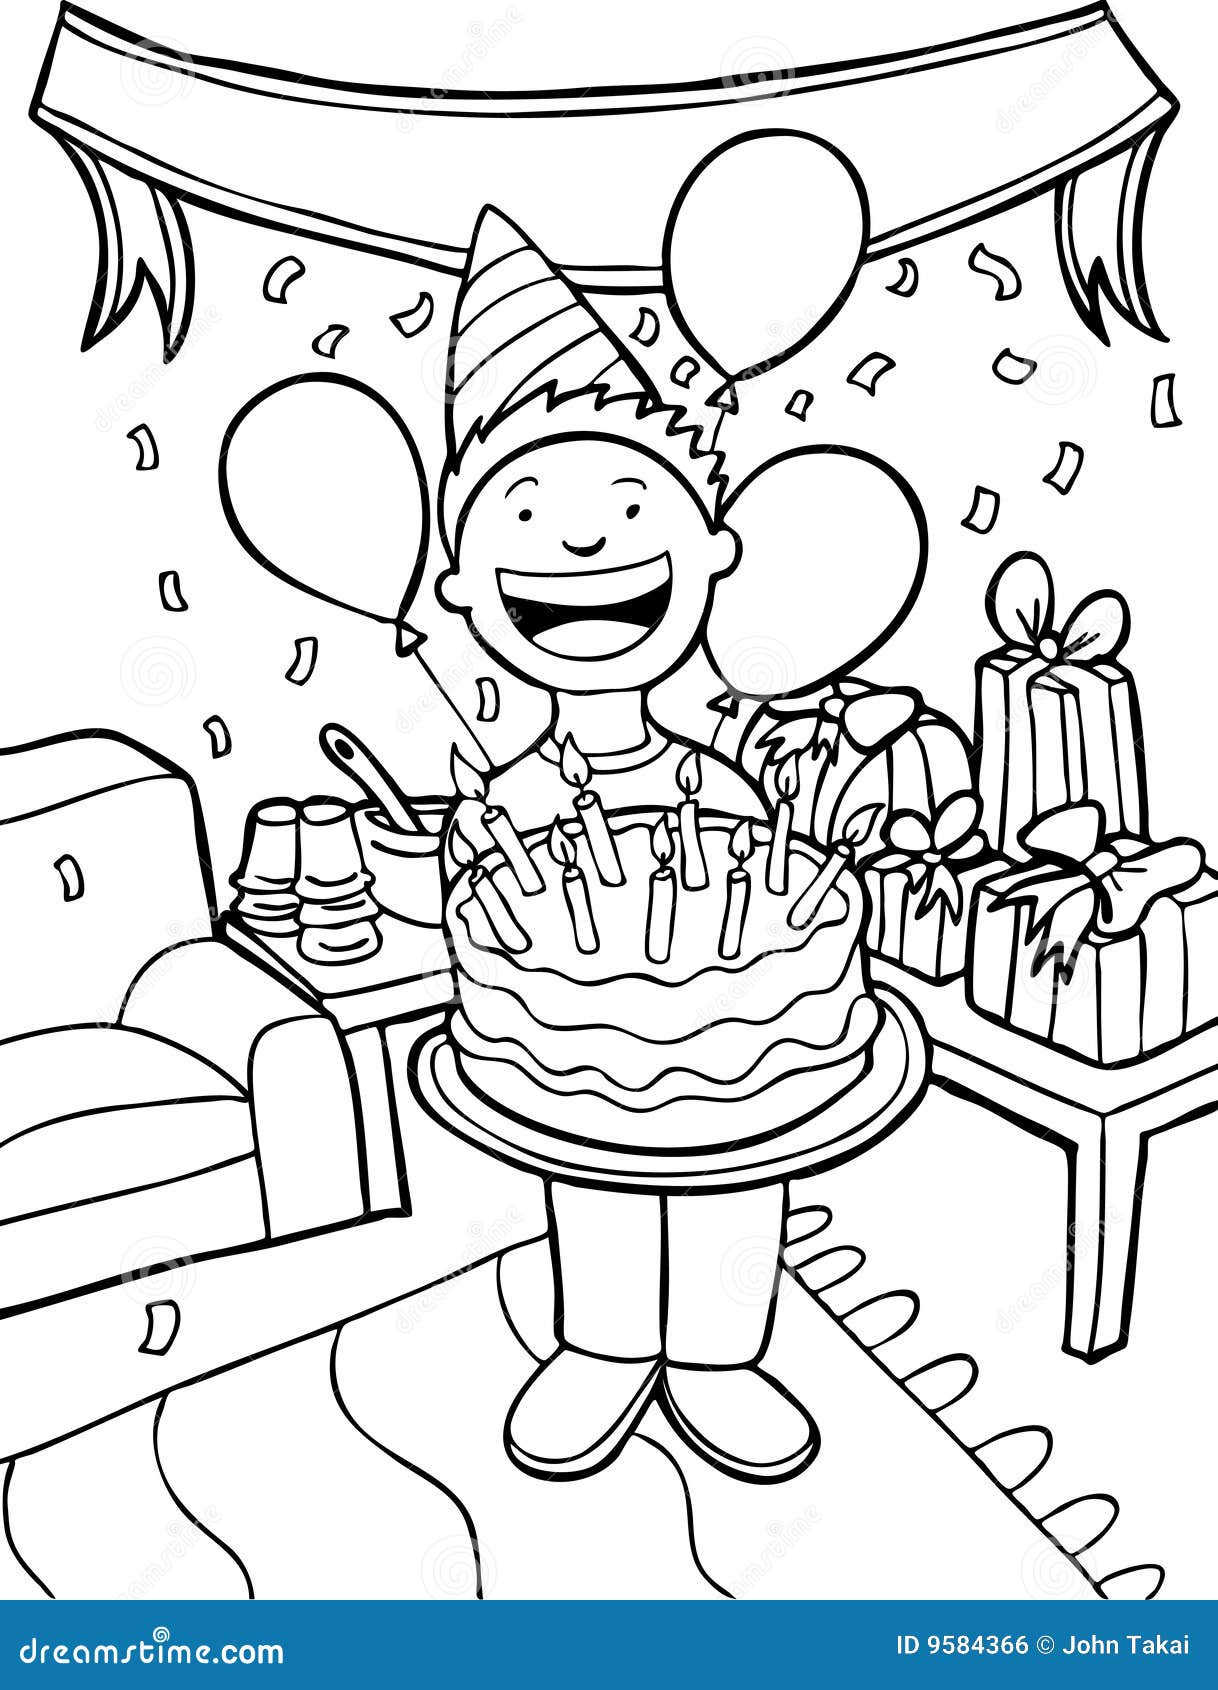 Party Time - Black and White Stock Vector - Illustration of clipart, cake: 9584366